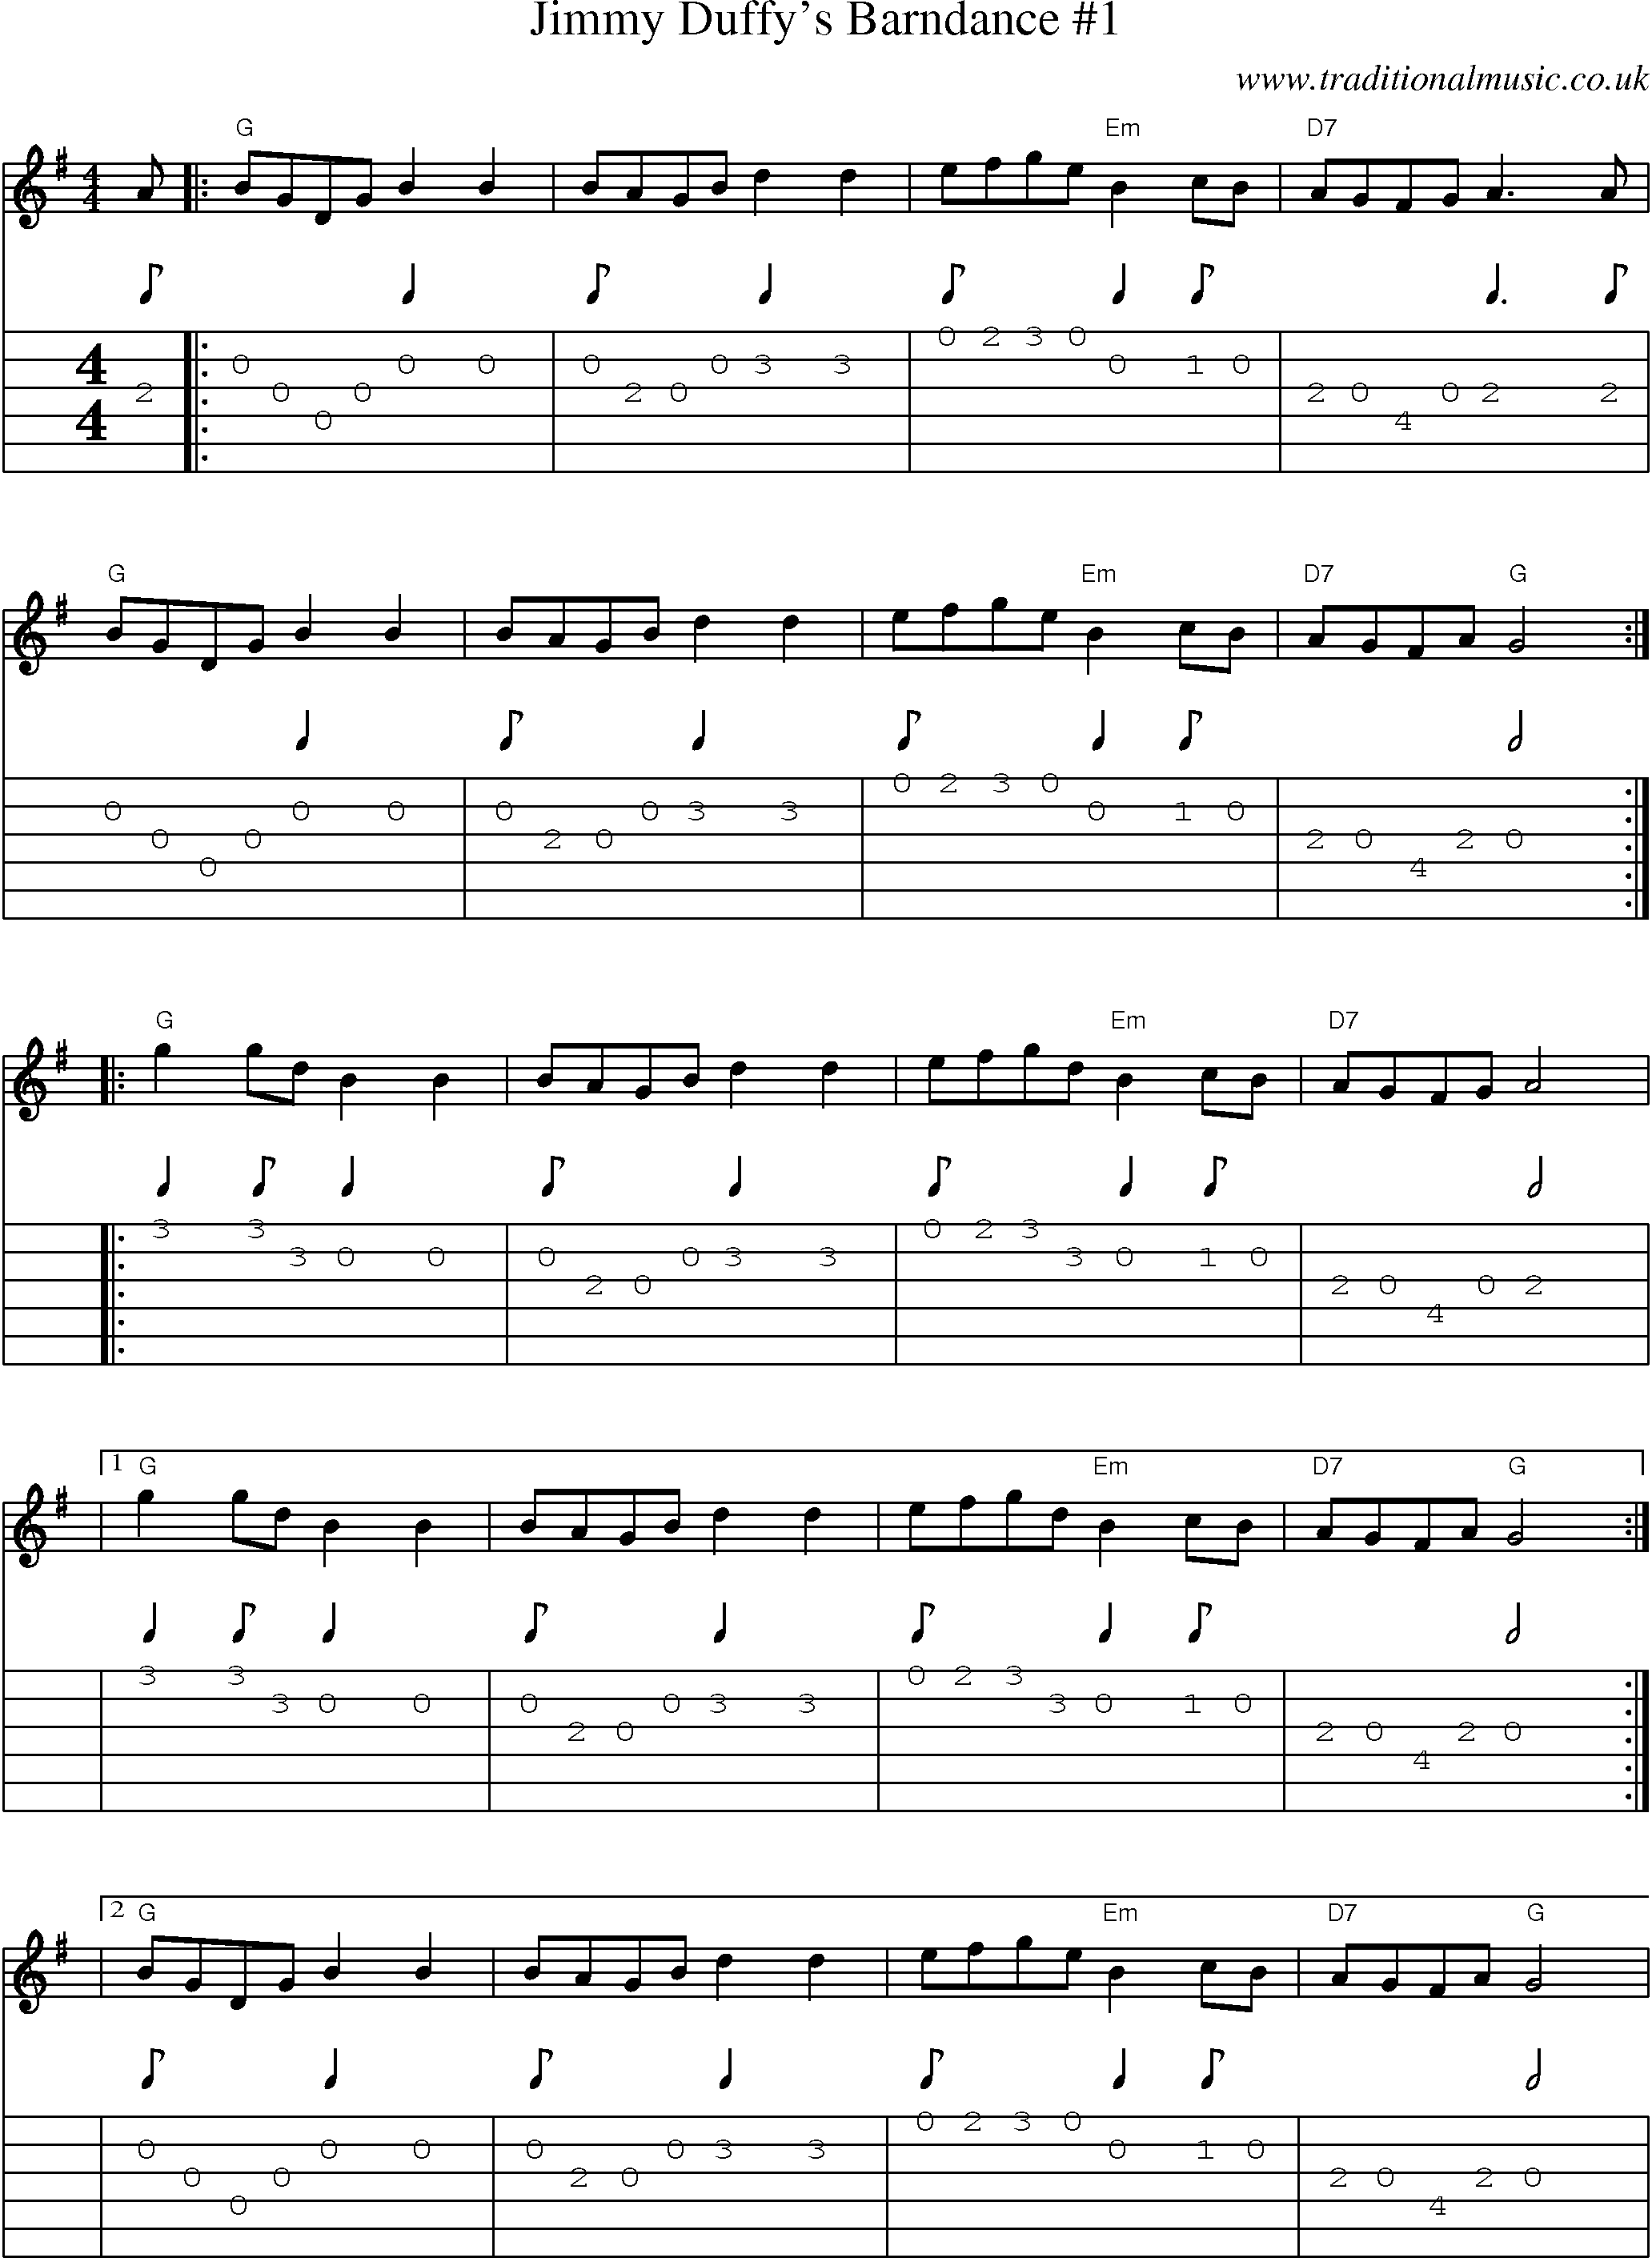 Music Score and Guitar Tabs for Jimmy Duffys Barndance 1